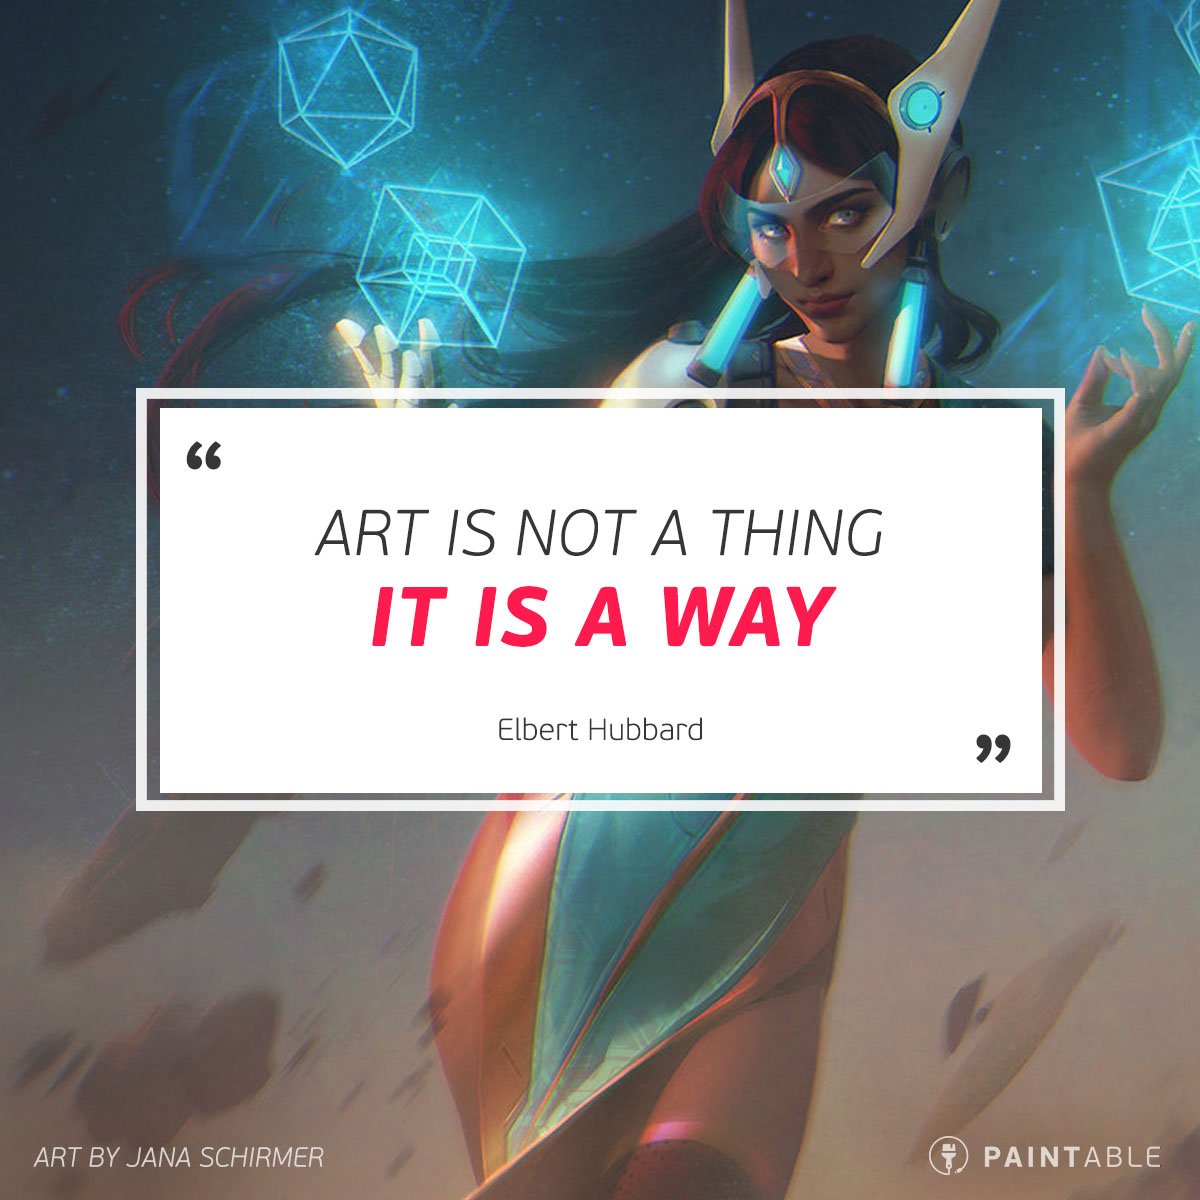 Jana Schrimer | 25 Inspirational Artist Quotes for Creatives and Digital Painters